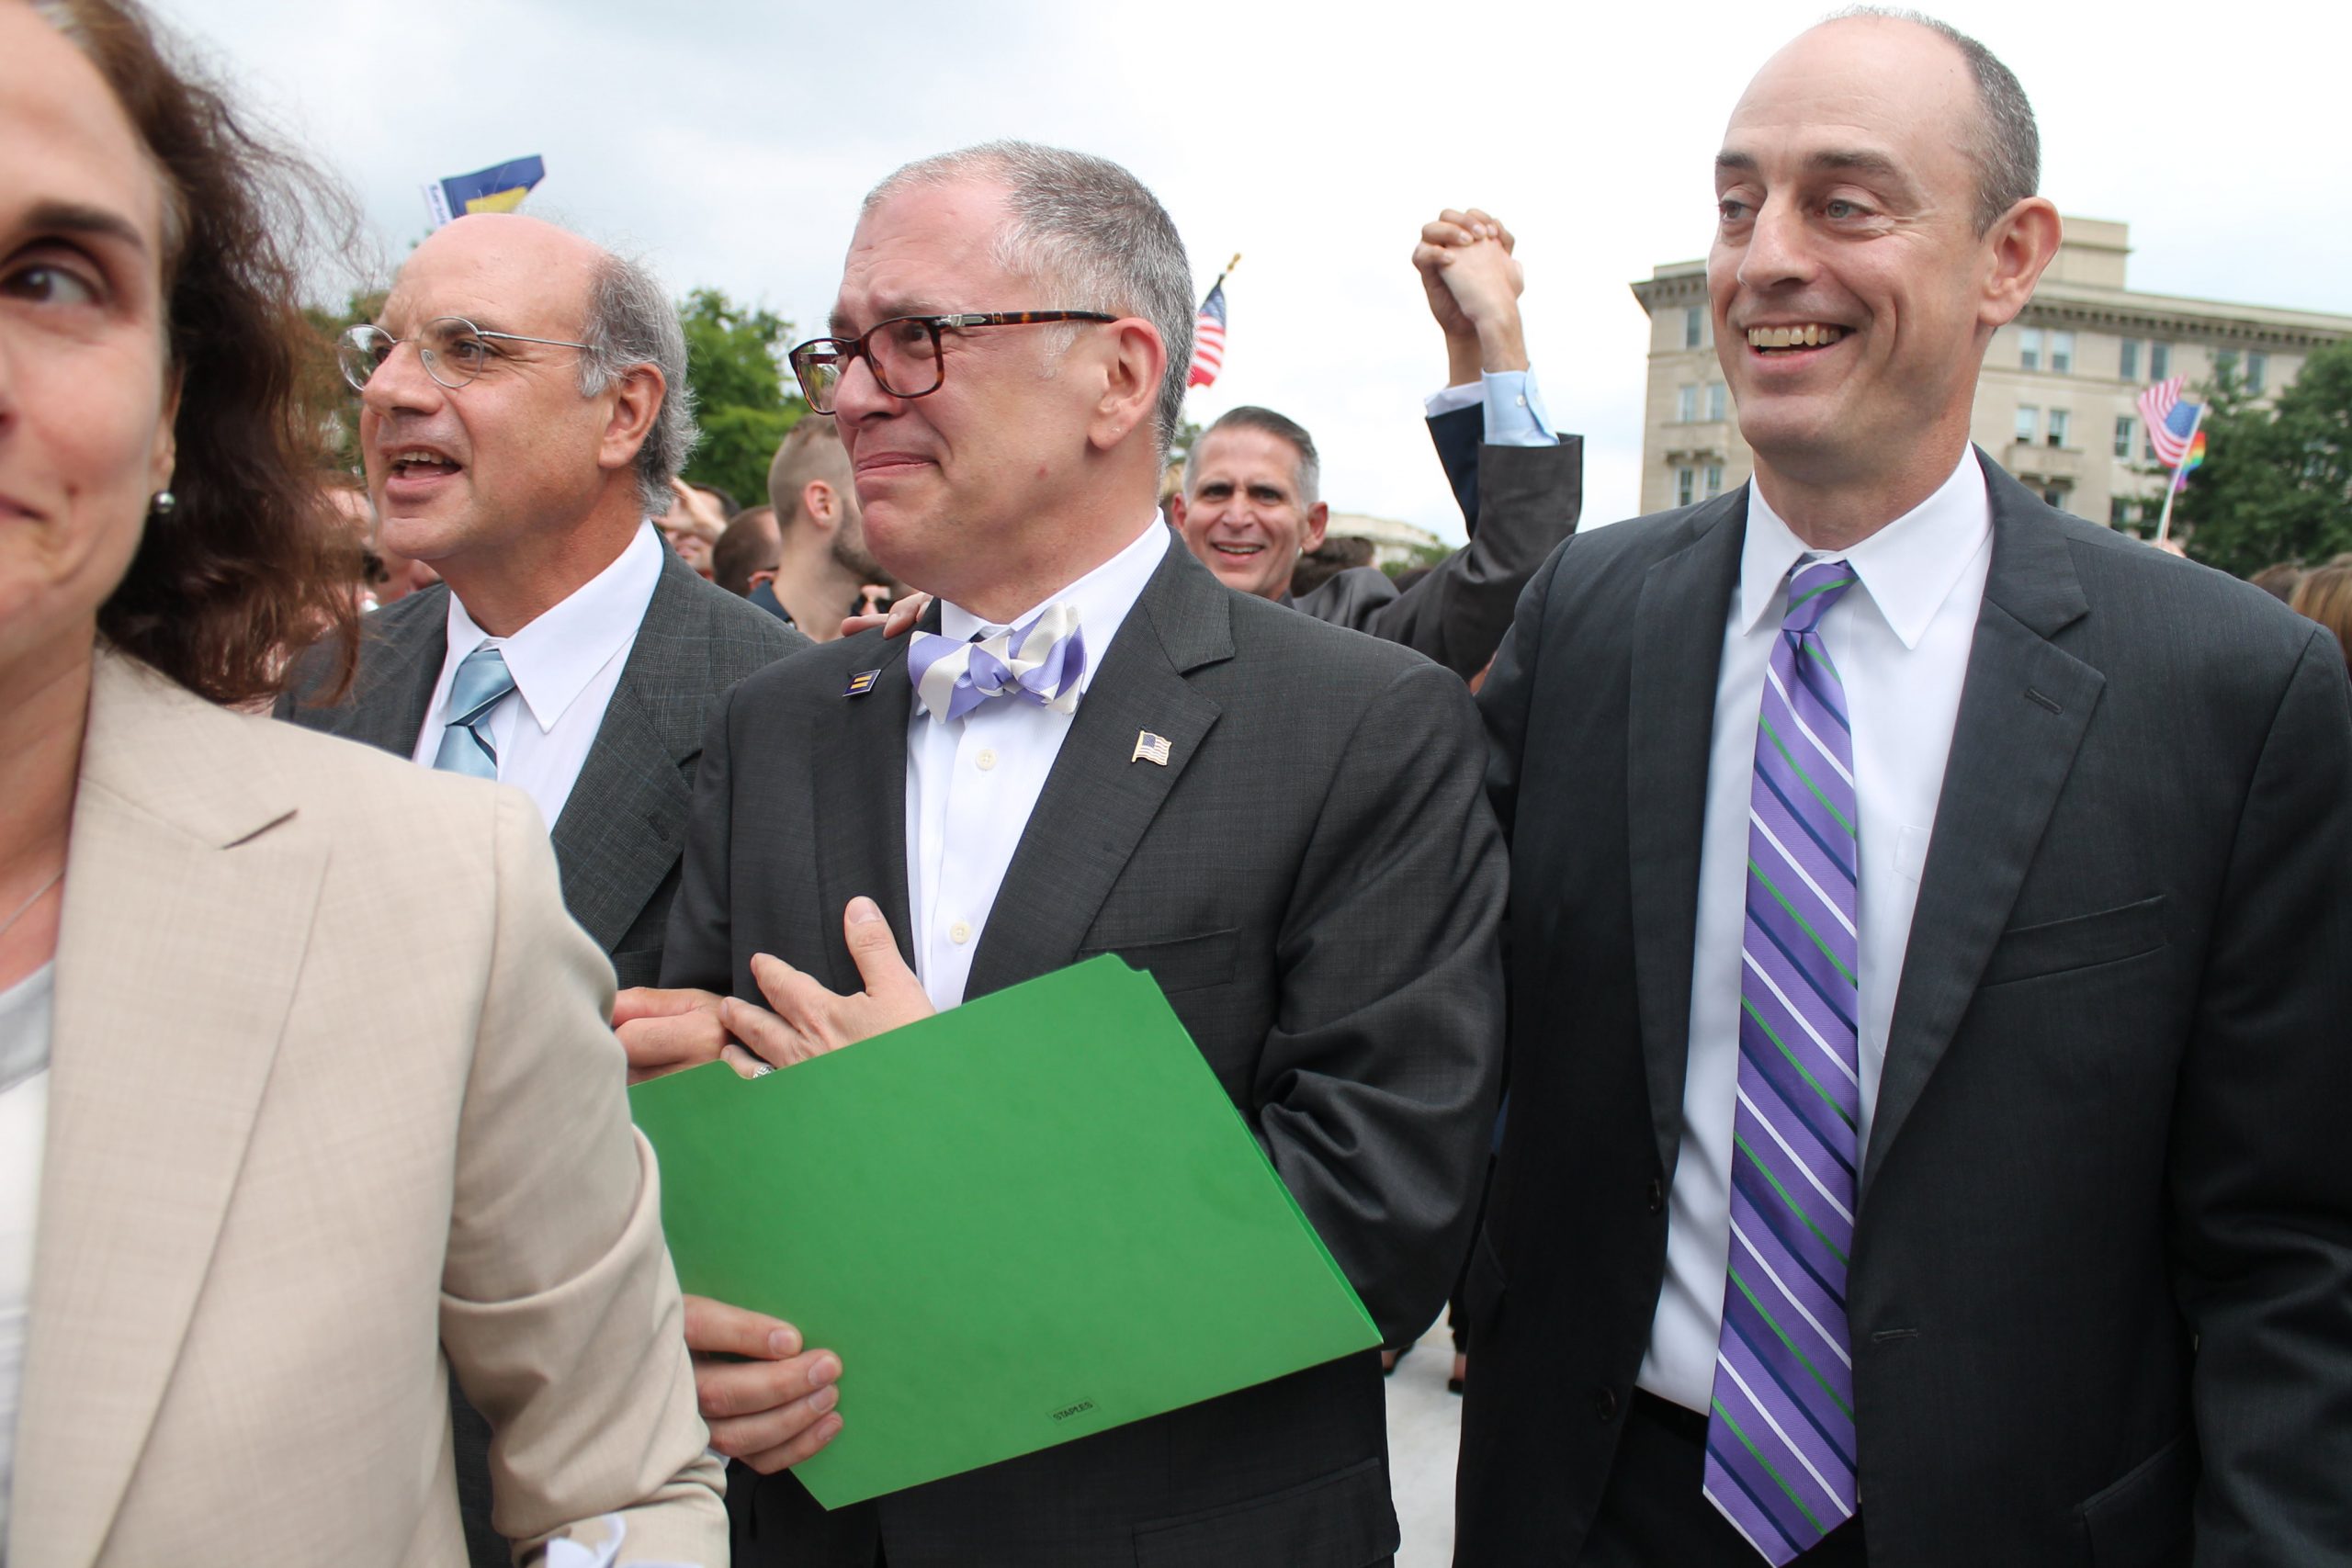 A man is emotional holding a green folder, two others smile around him.